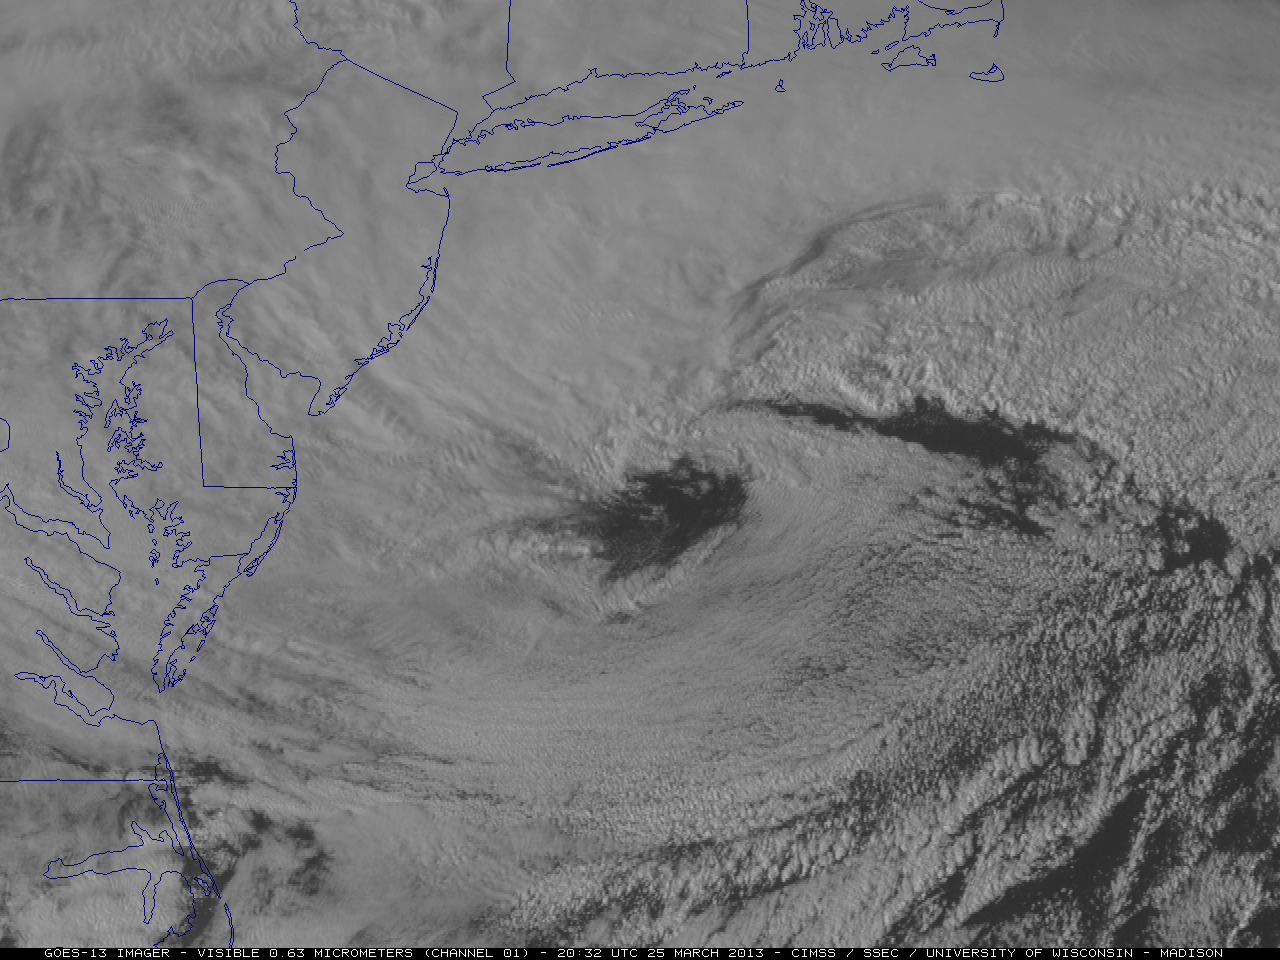 GOES-13 0.63 Âµm visible channel image (click image to play animation)